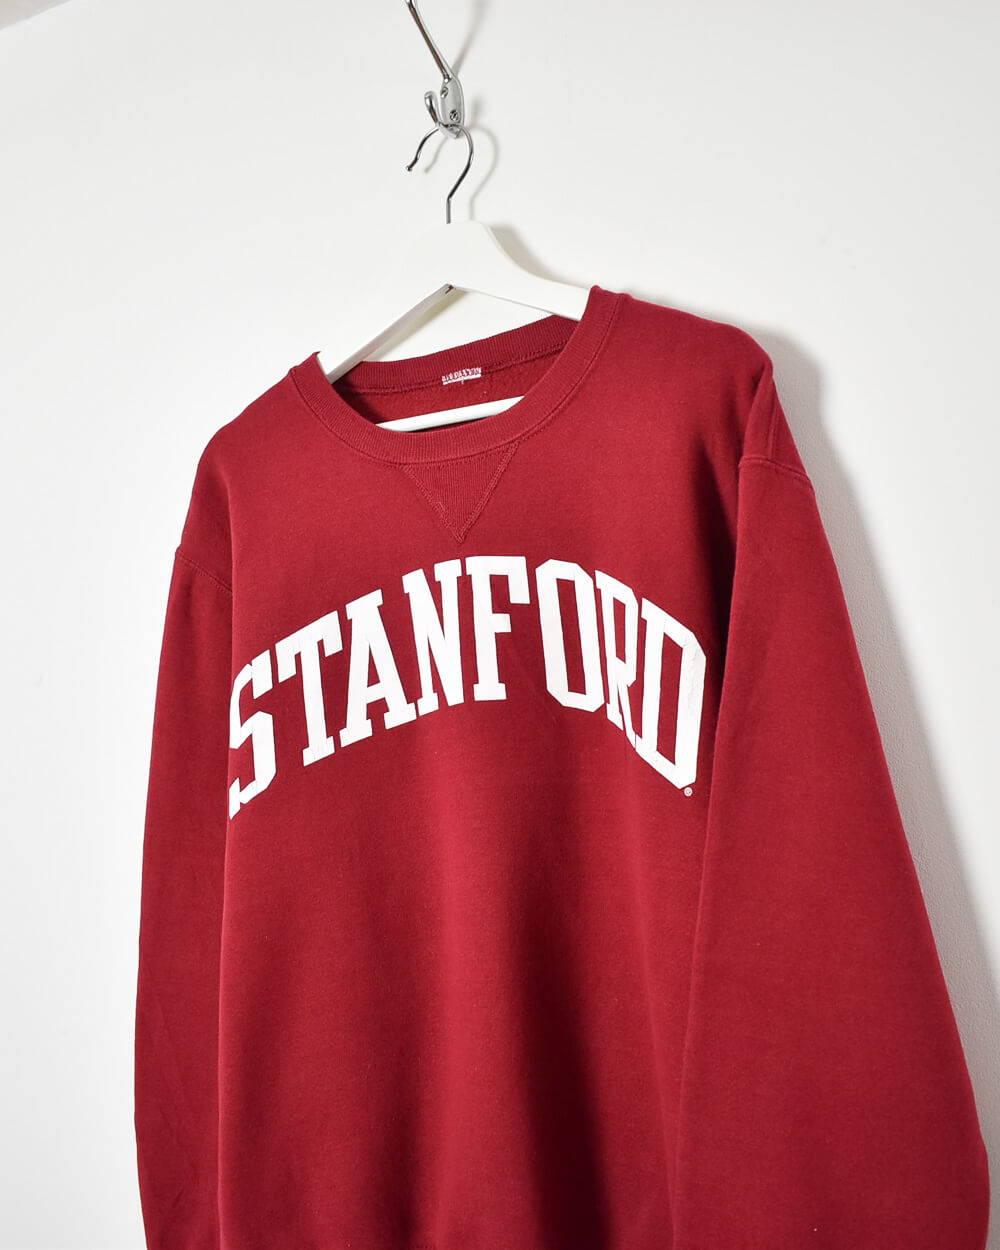 Russell Athletic Stanford Sweatshirt - Small - Domno Vintage 90s, 80s, 00s Retro and Vintage Clothing 